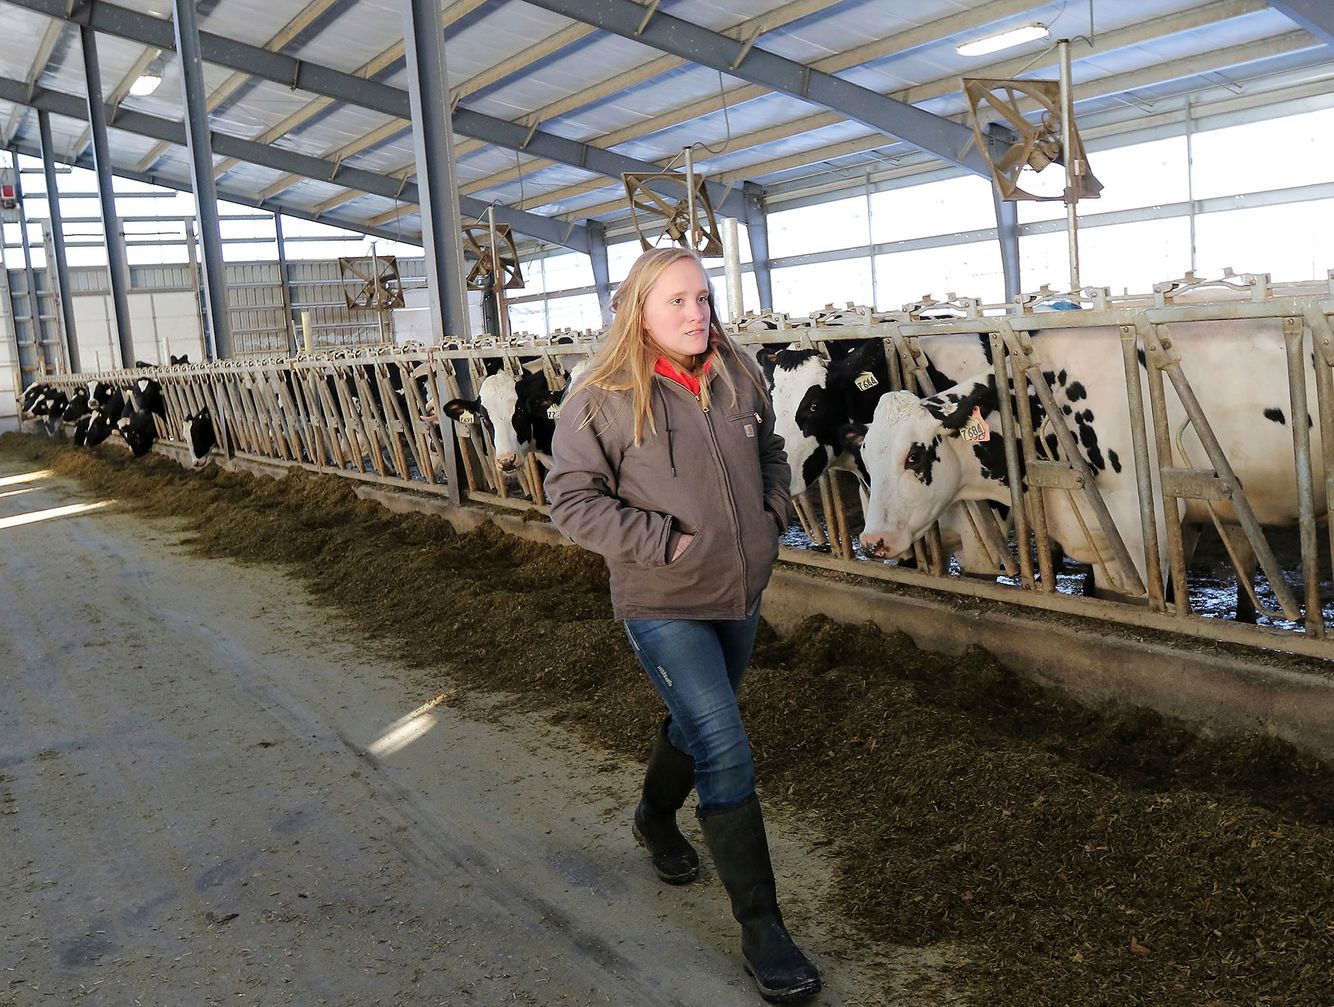 More women entering dairy industry in Wisconsin | The Seattle Times